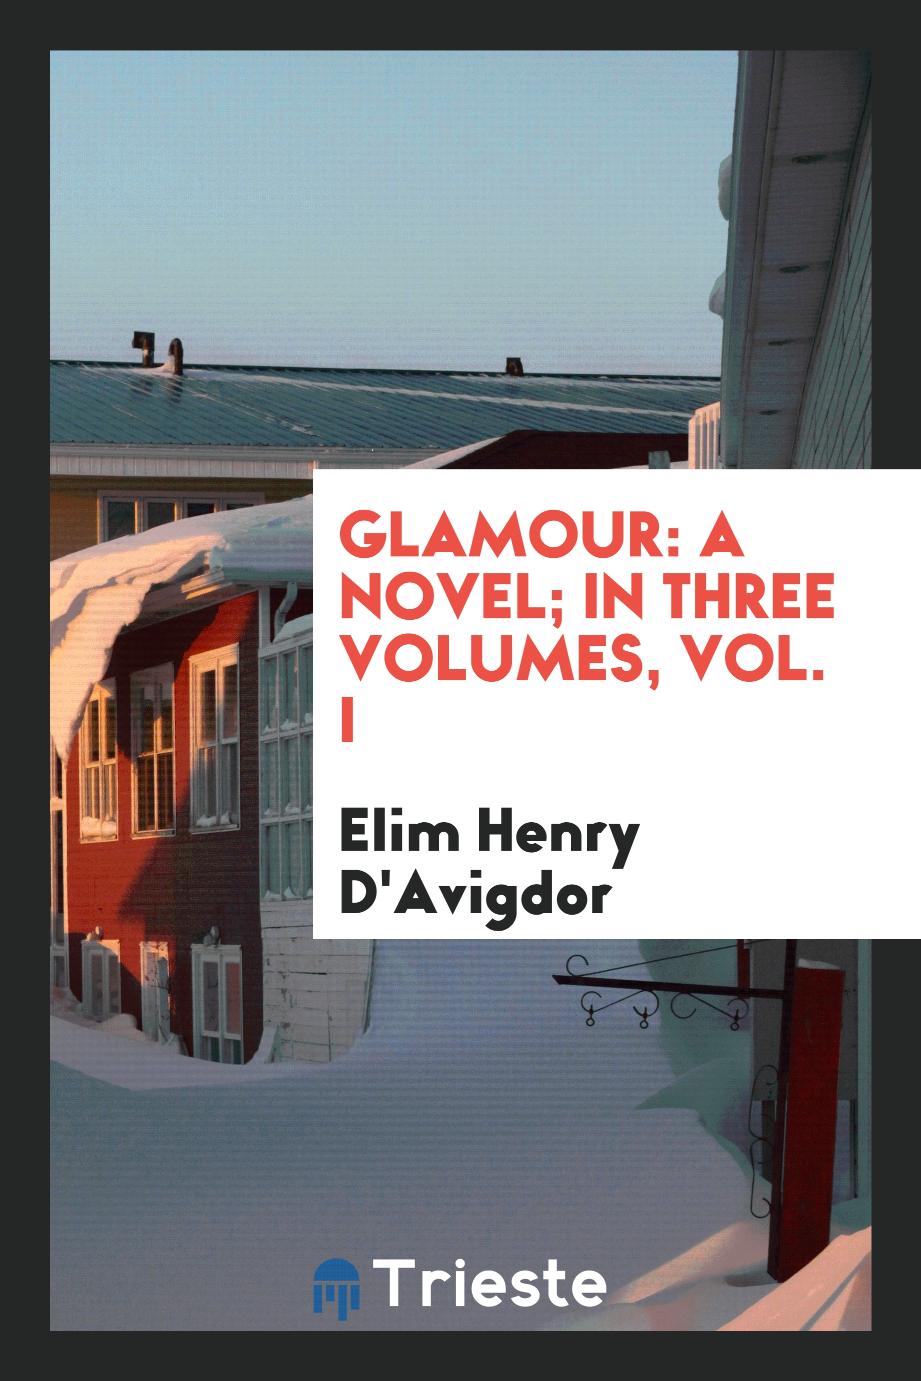 Glamour: a novel; in three volumes, Vol. I